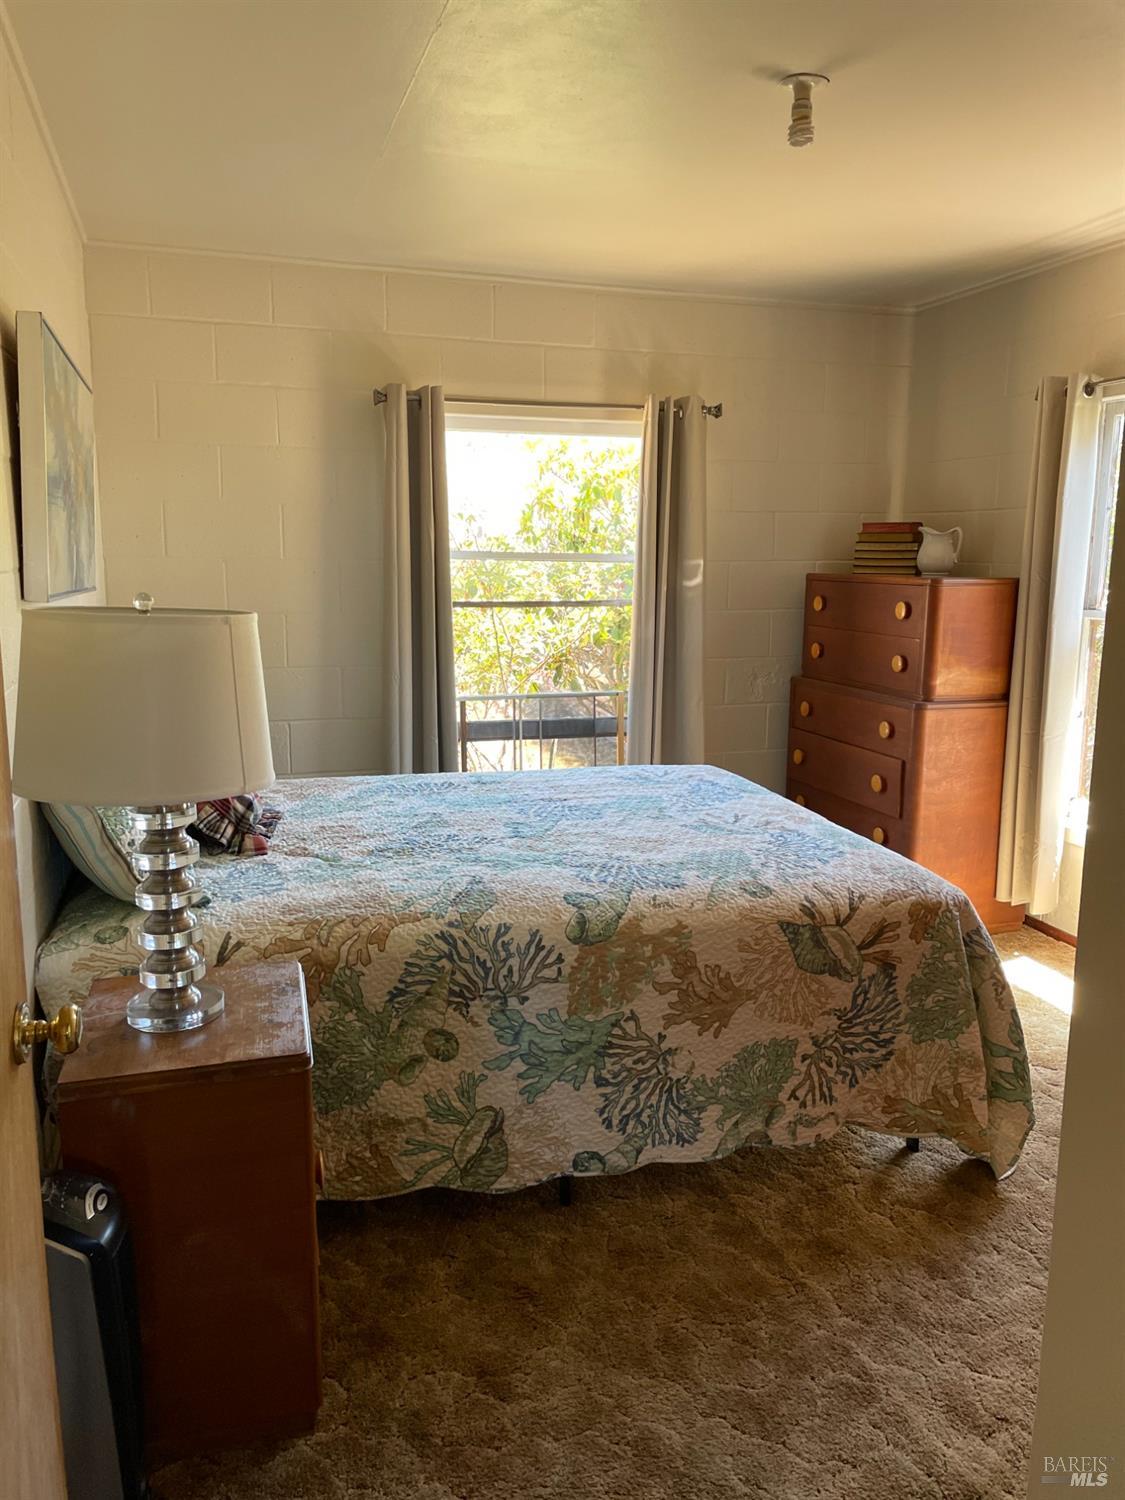 5760 S Hwy 1 None, Elk, California, 95432, United States, 2 Bedrooms Bedrooms, ,2 BathroomsBathrooms,Residential,For Sale,5760 S Hwy 1 None,1435909